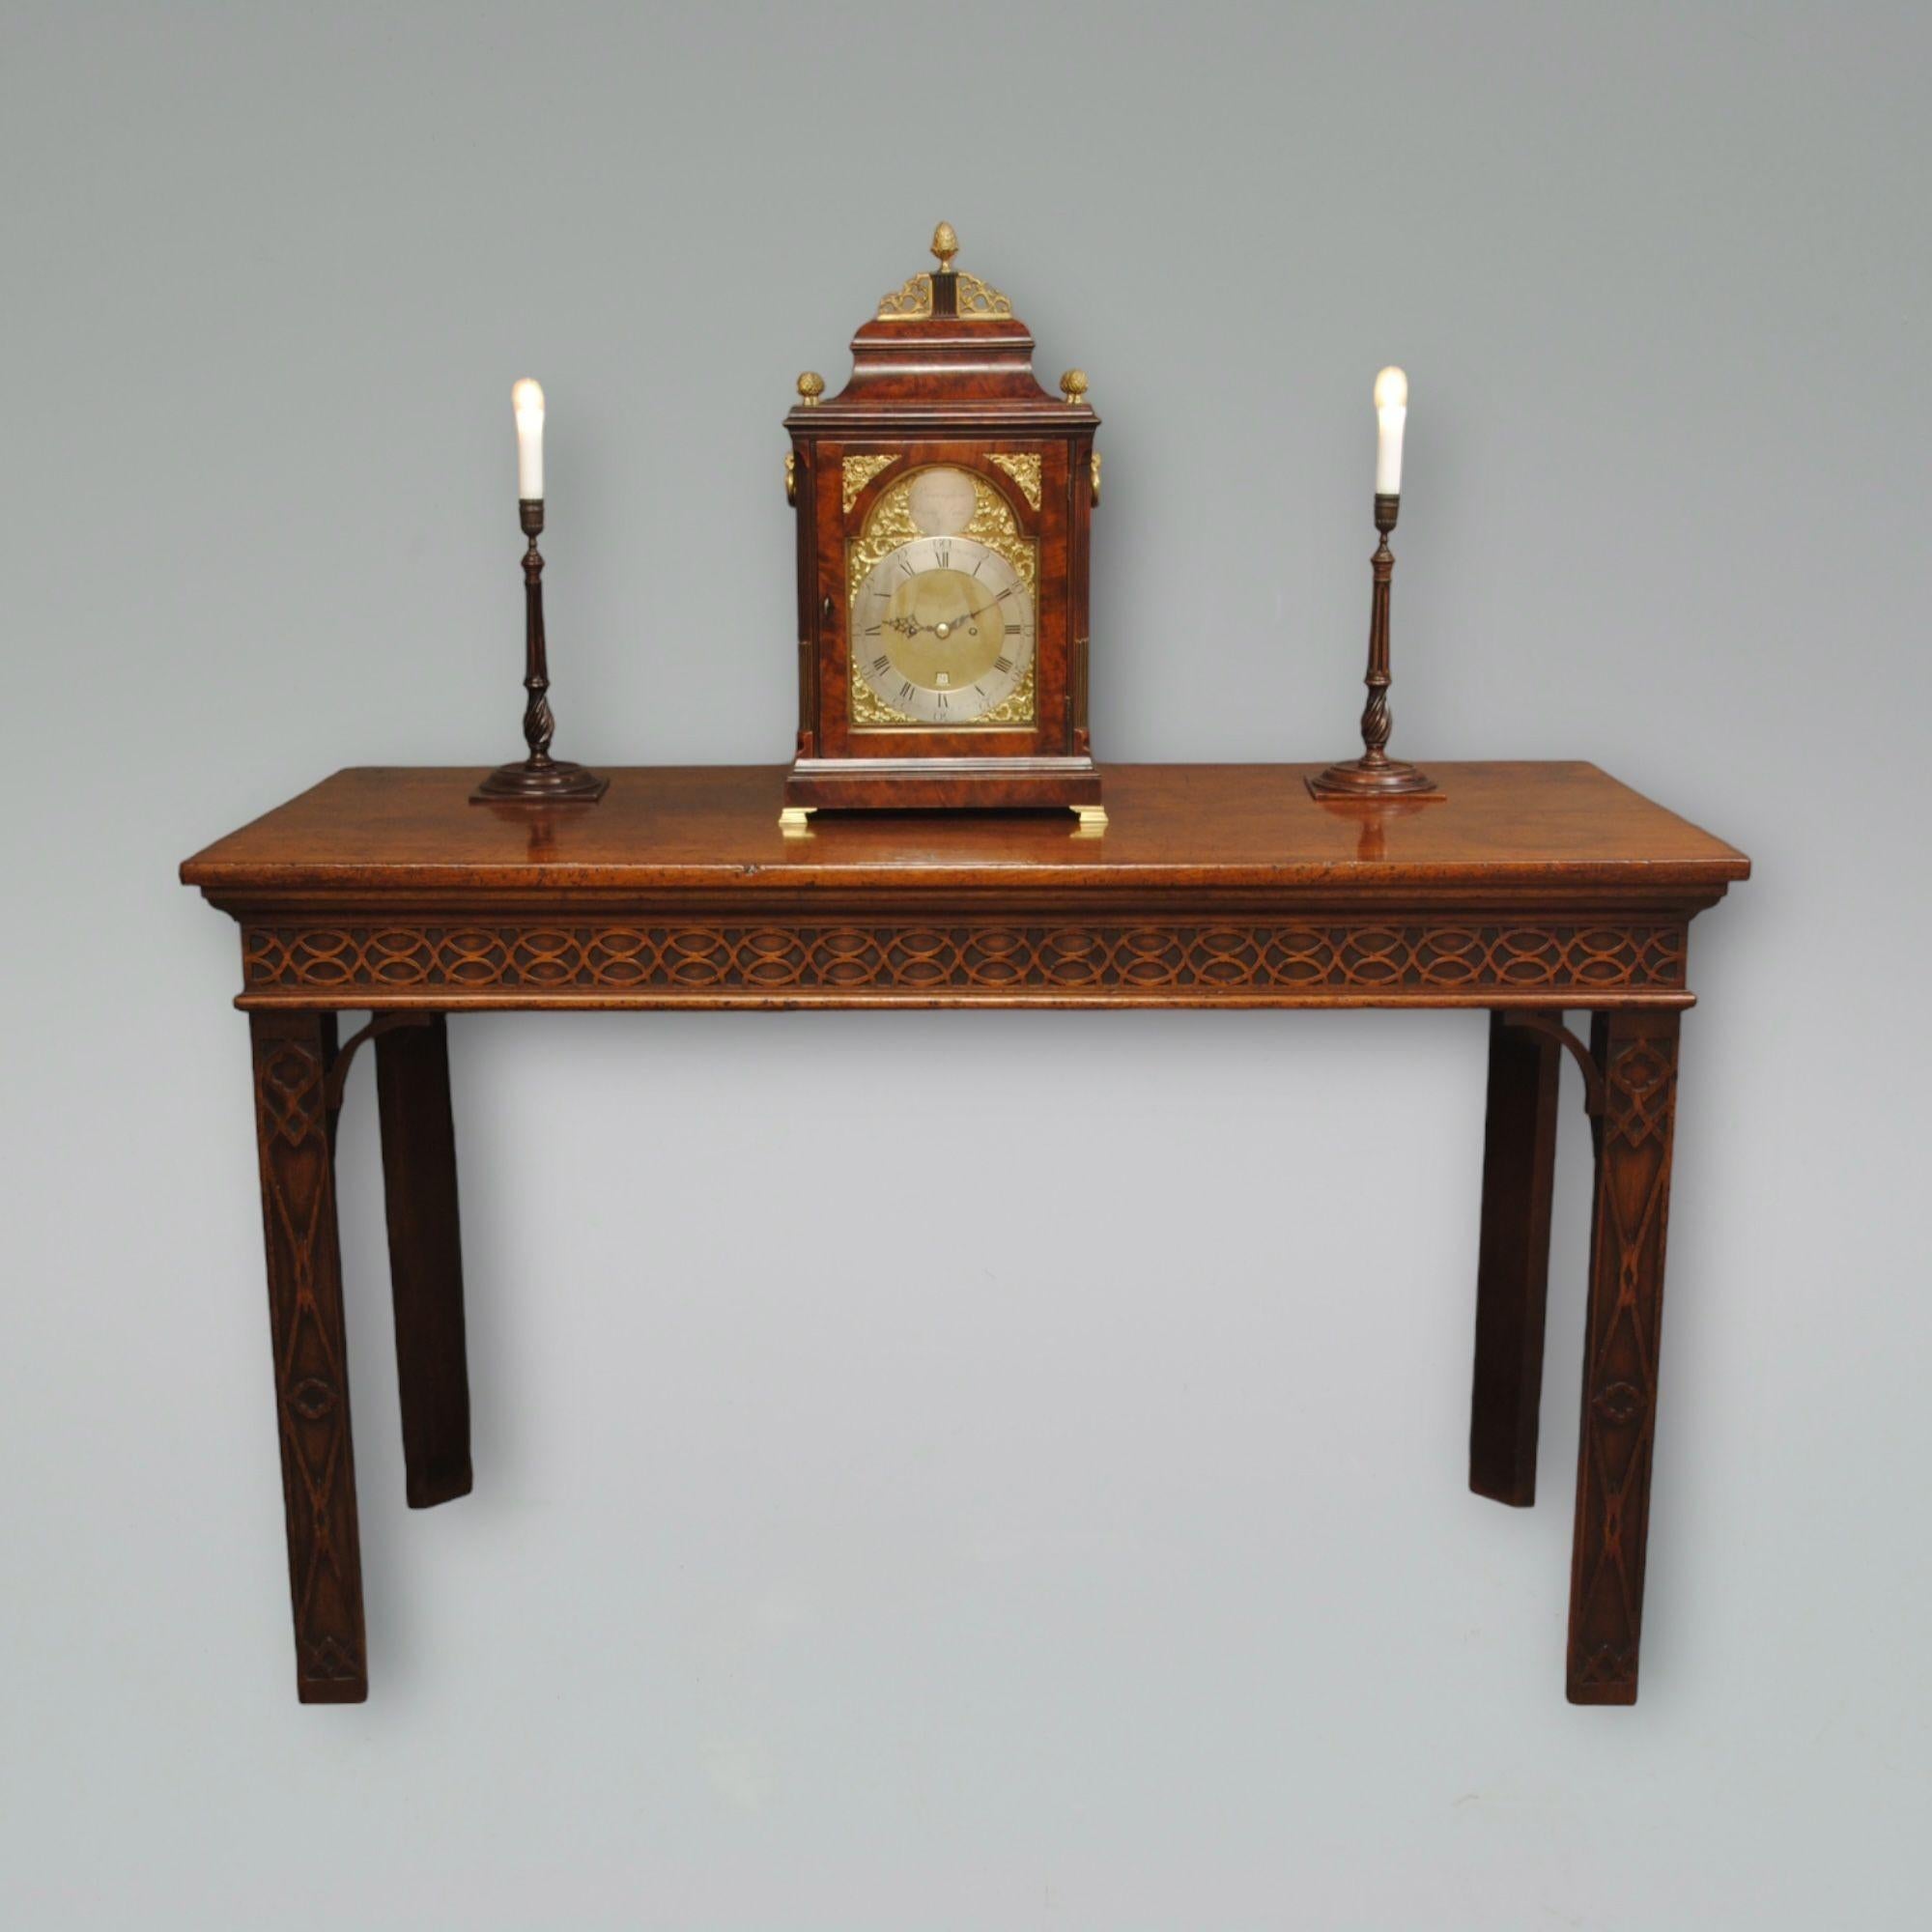 Chippendale Period Mahogany Serving Table In Good Condition For Sale In Lincolnshire, GB